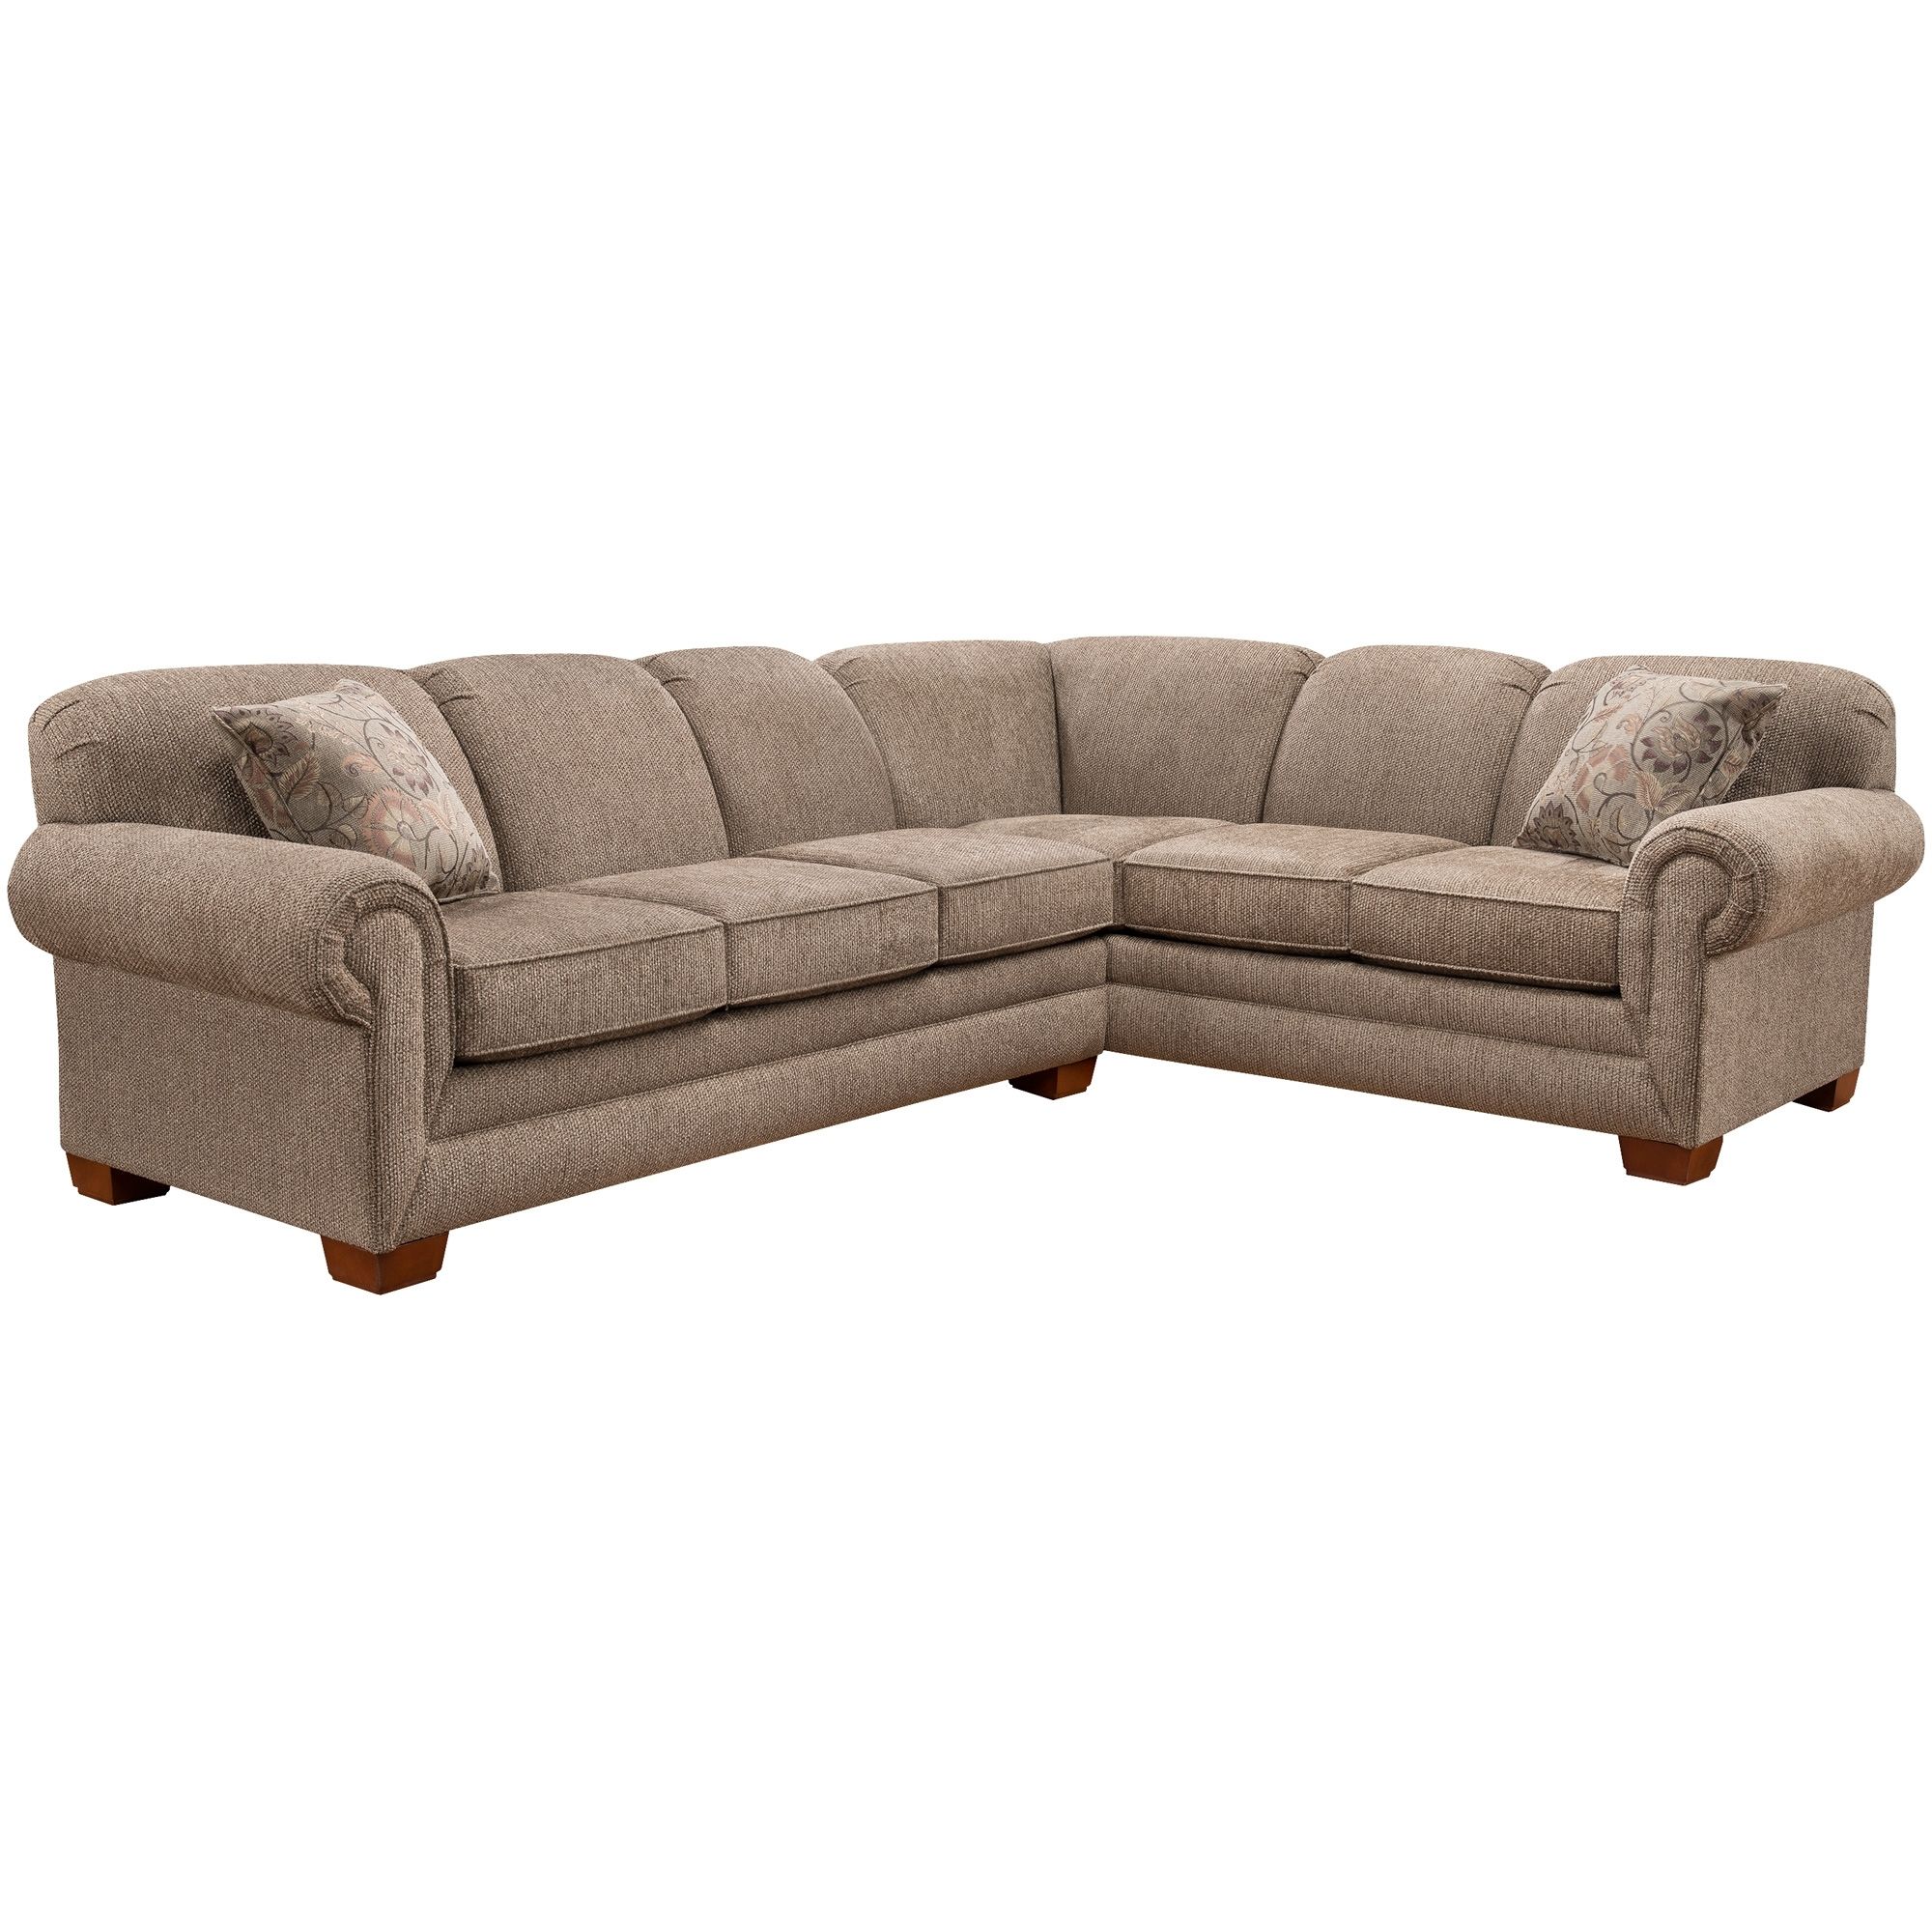 Slumberland Furniture | Tenor 2 Pc Brown Large Sectional Pertaining To Harper Foam 3 Piece Sectionals With Raf Chaise (View 16 of 30)